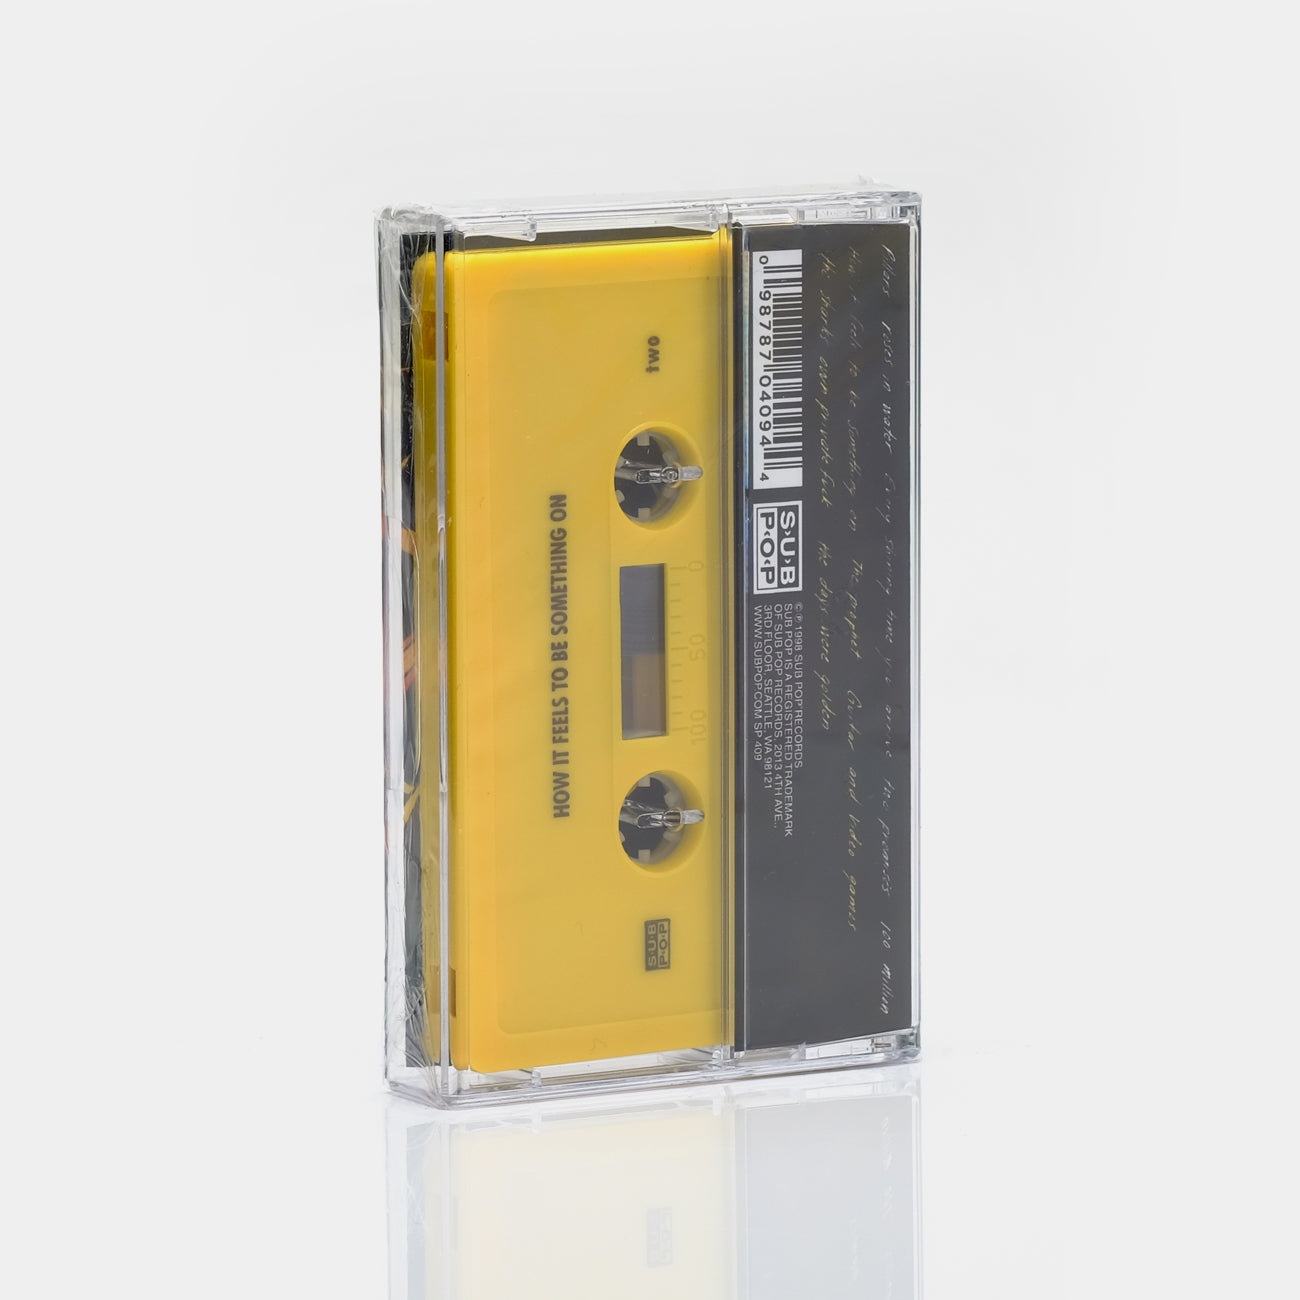 Sunny Day Real Estate - How It Feels To Be Something On Cassette Tape